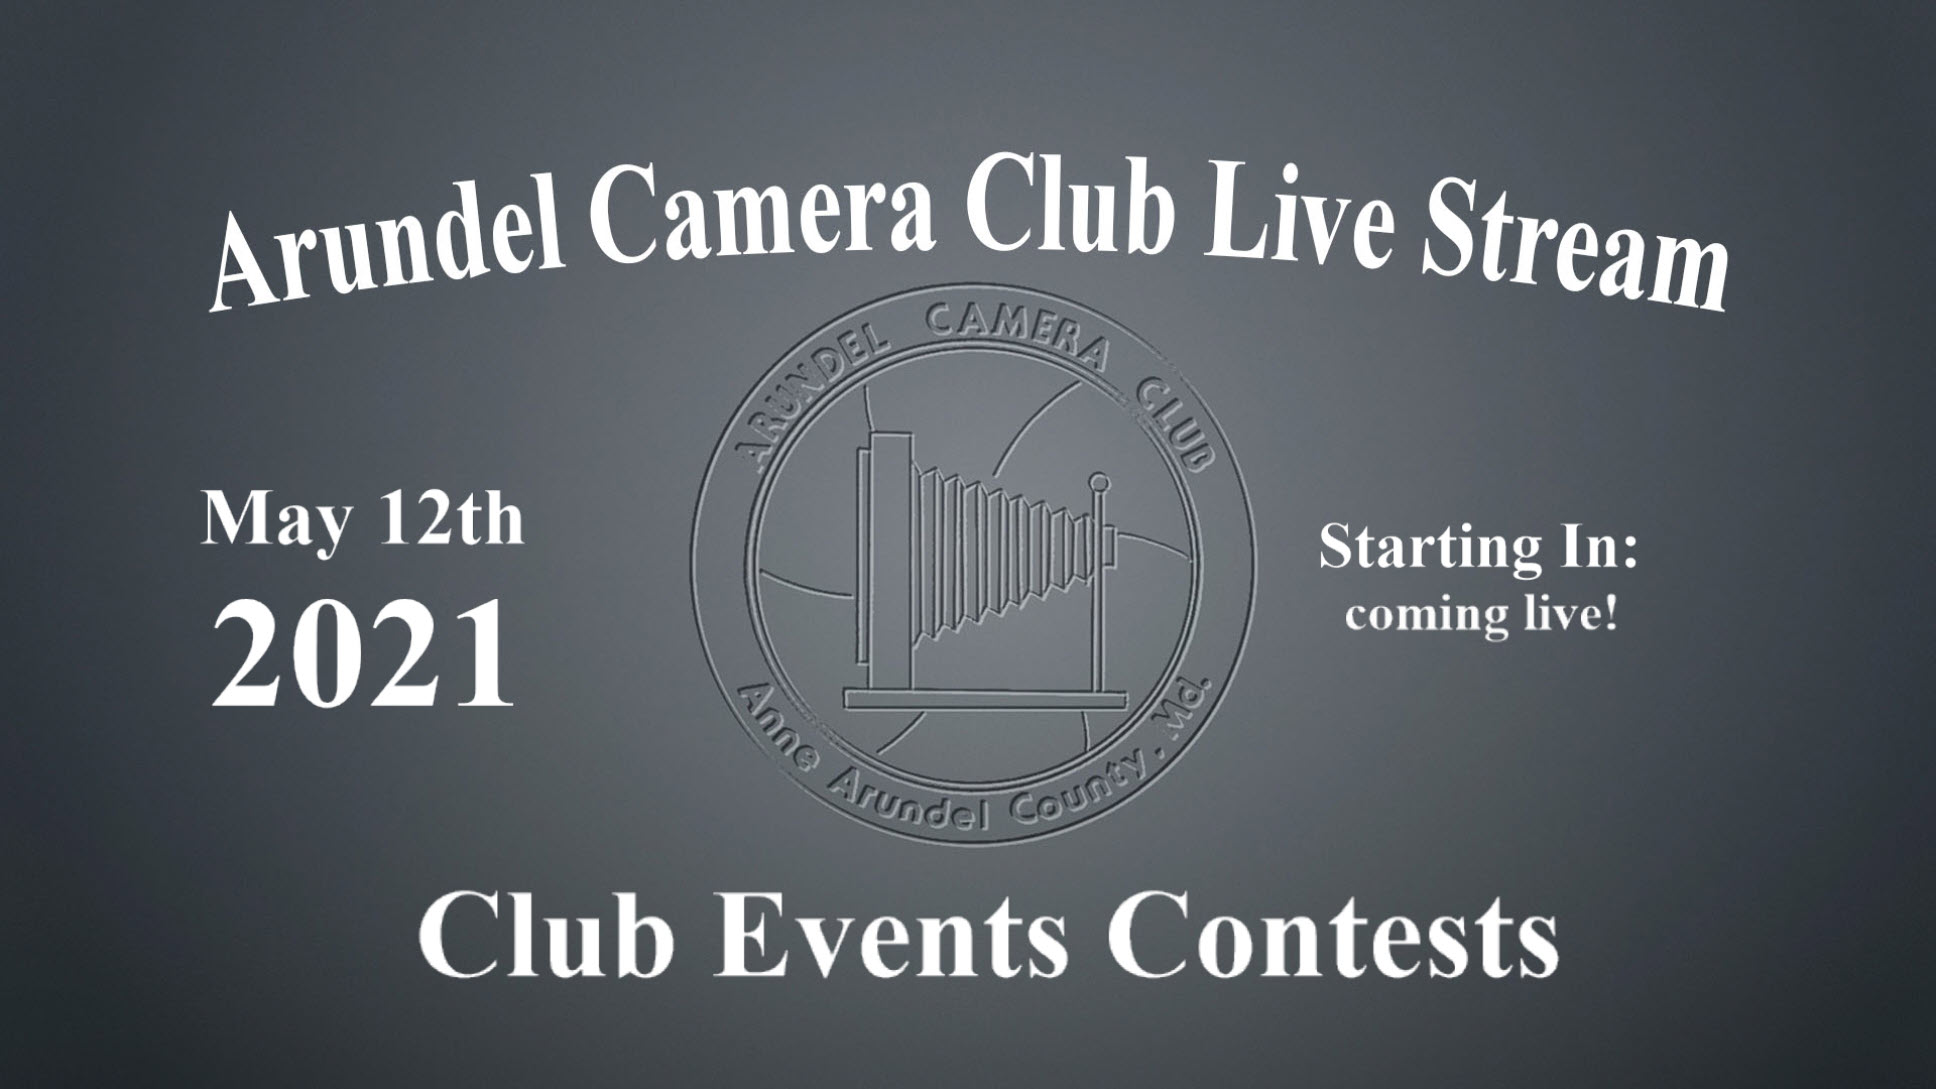 2021 May 12: Club Events Contest Video Posted